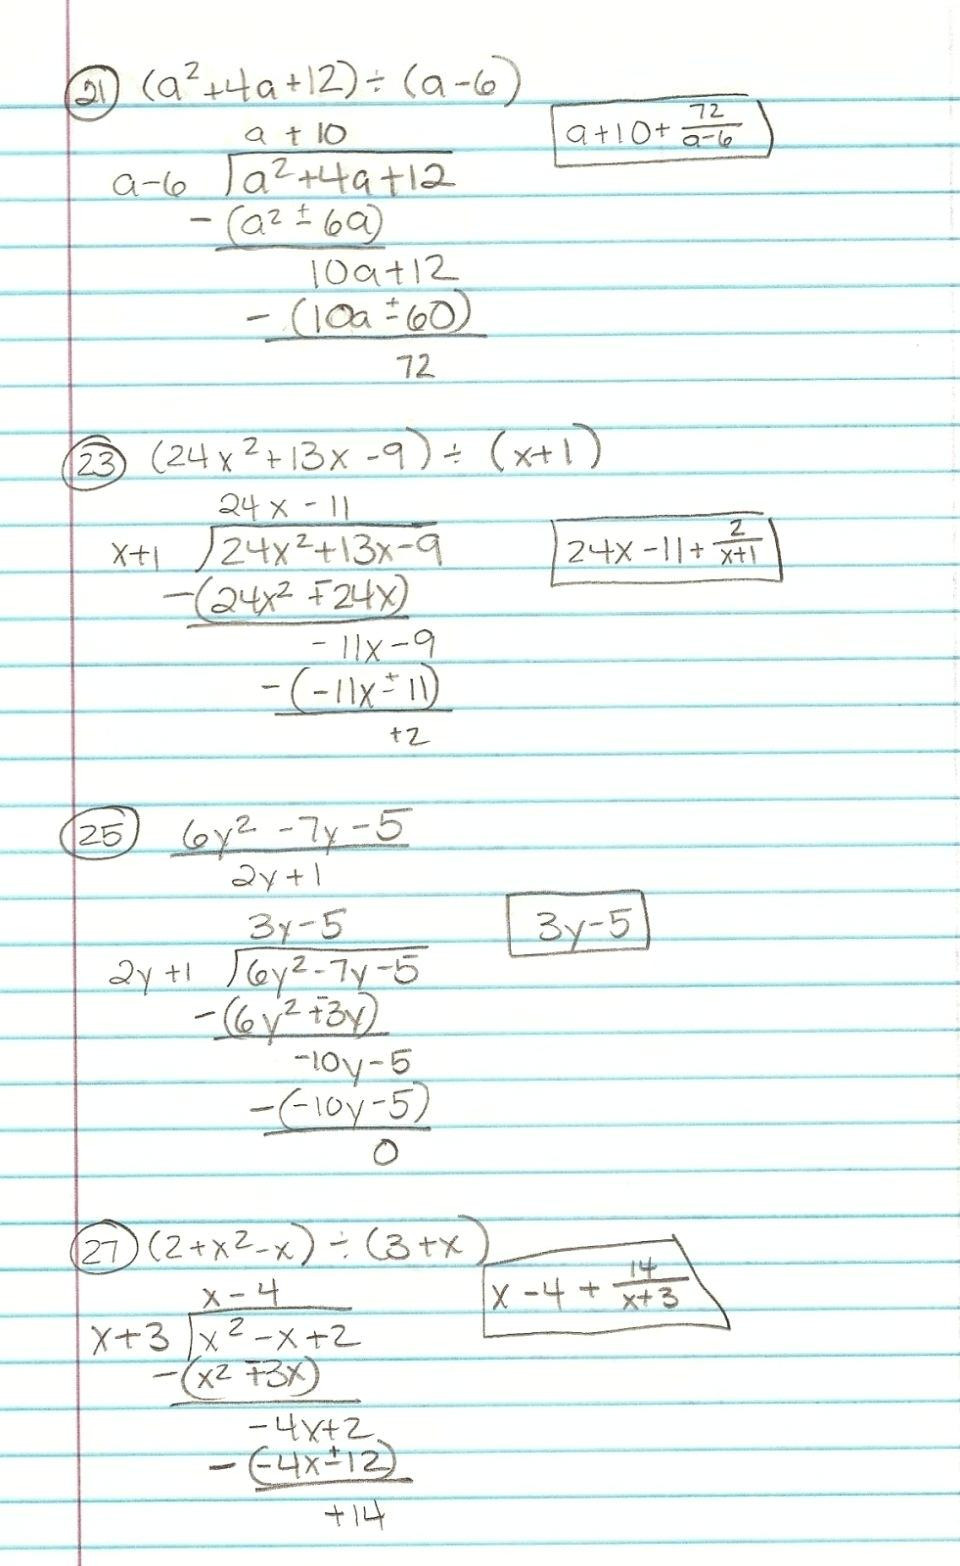 Multiplying Polynomials Worksheet Answers Add Subtract Multiply Polynomials Worksheet Nidecmege